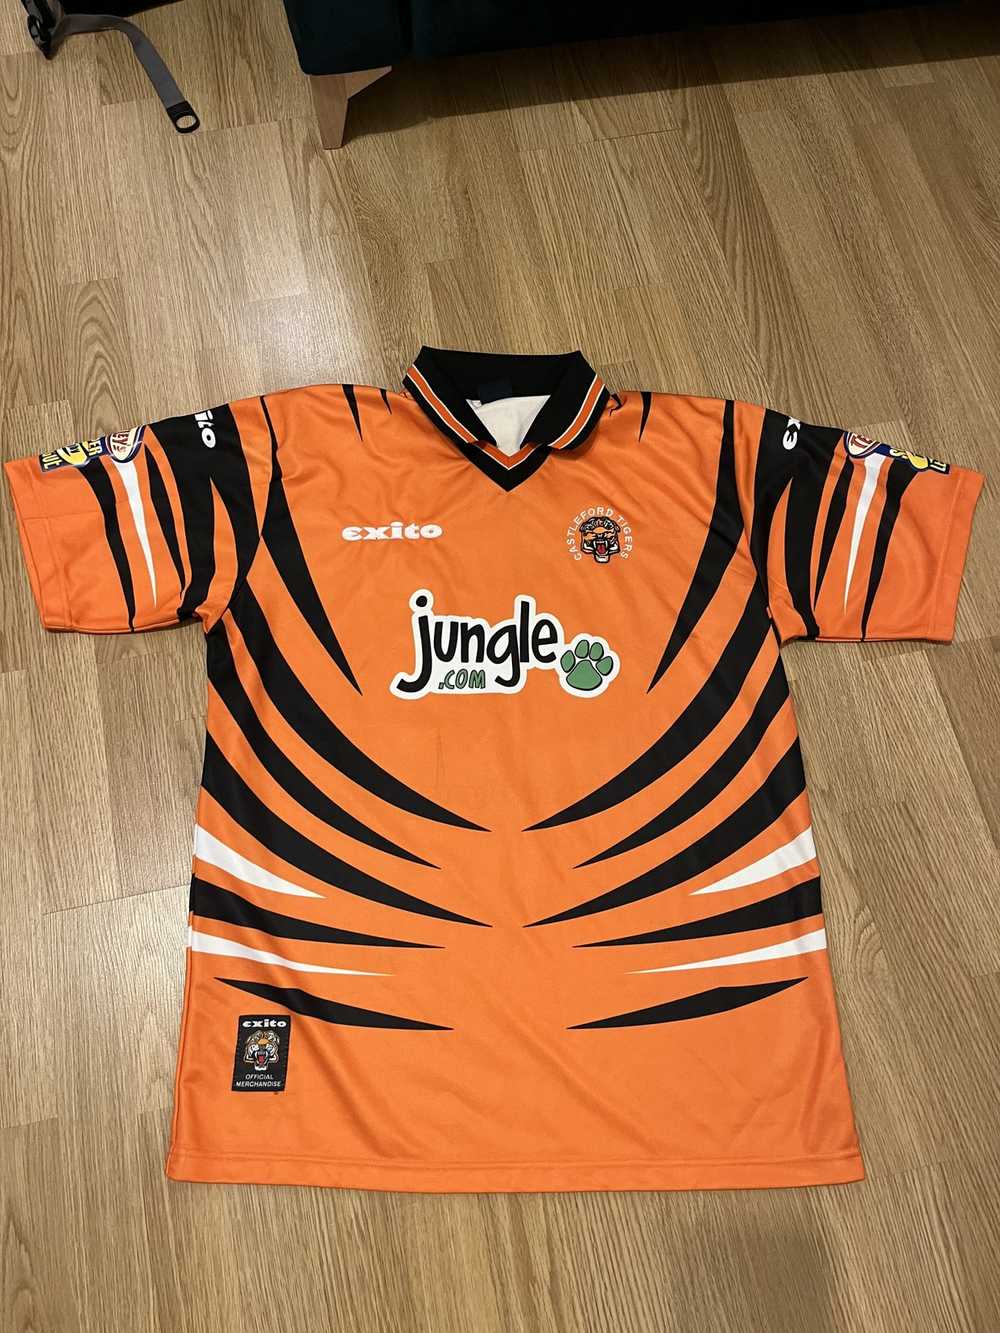 England Rugby League Castleford Tigers Exito 2002… - image 1